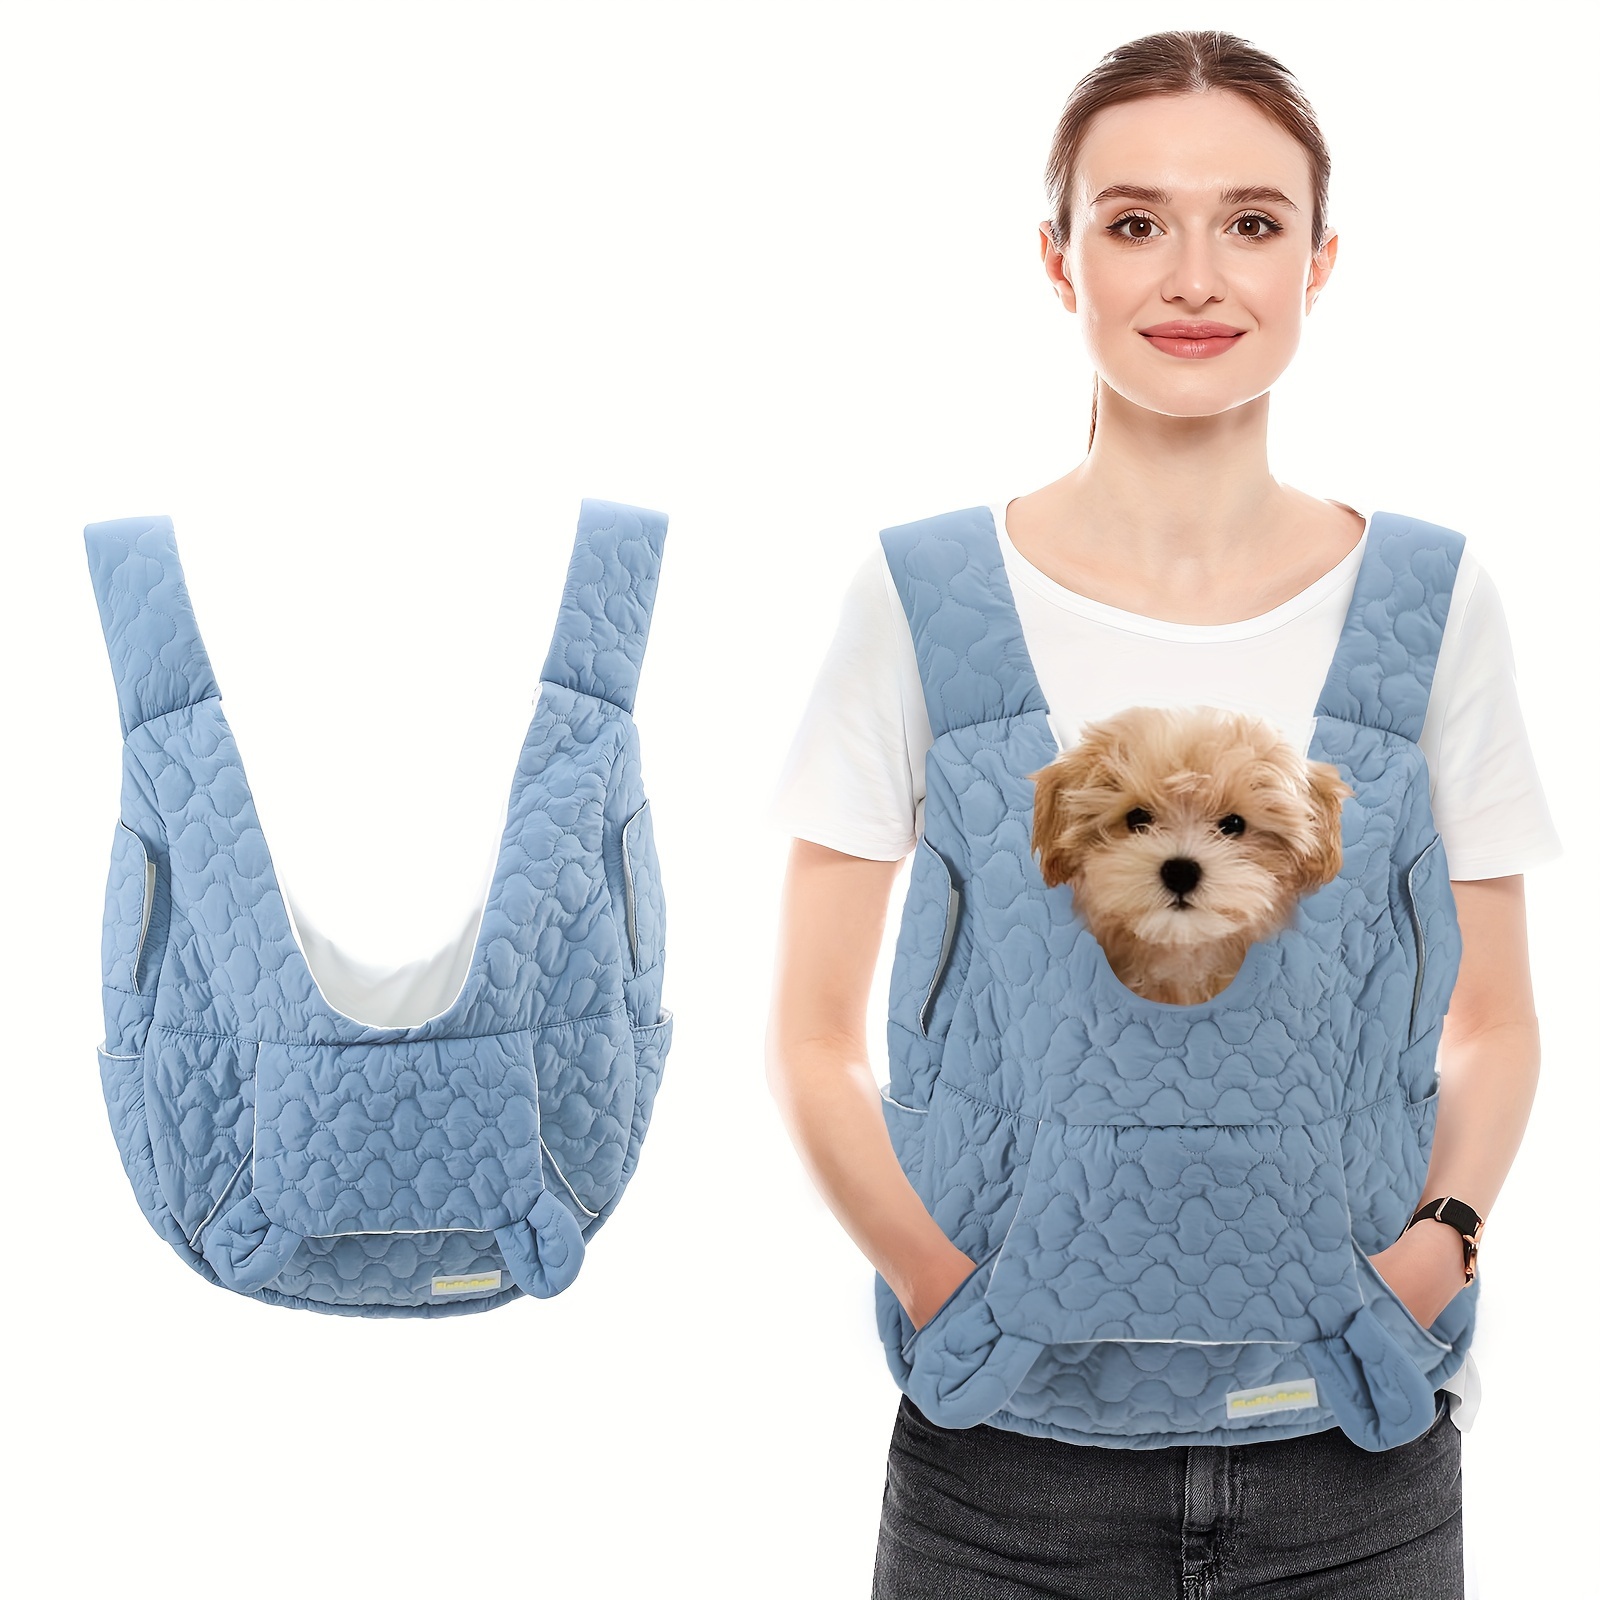 

Extra-large Fluffybaby Dog Sling Carrier - Winter Pet Bag With Cotton Lining, Waterproof & Breathable Design Small Dog Carrier Bag Medium Dog Carrier Bag